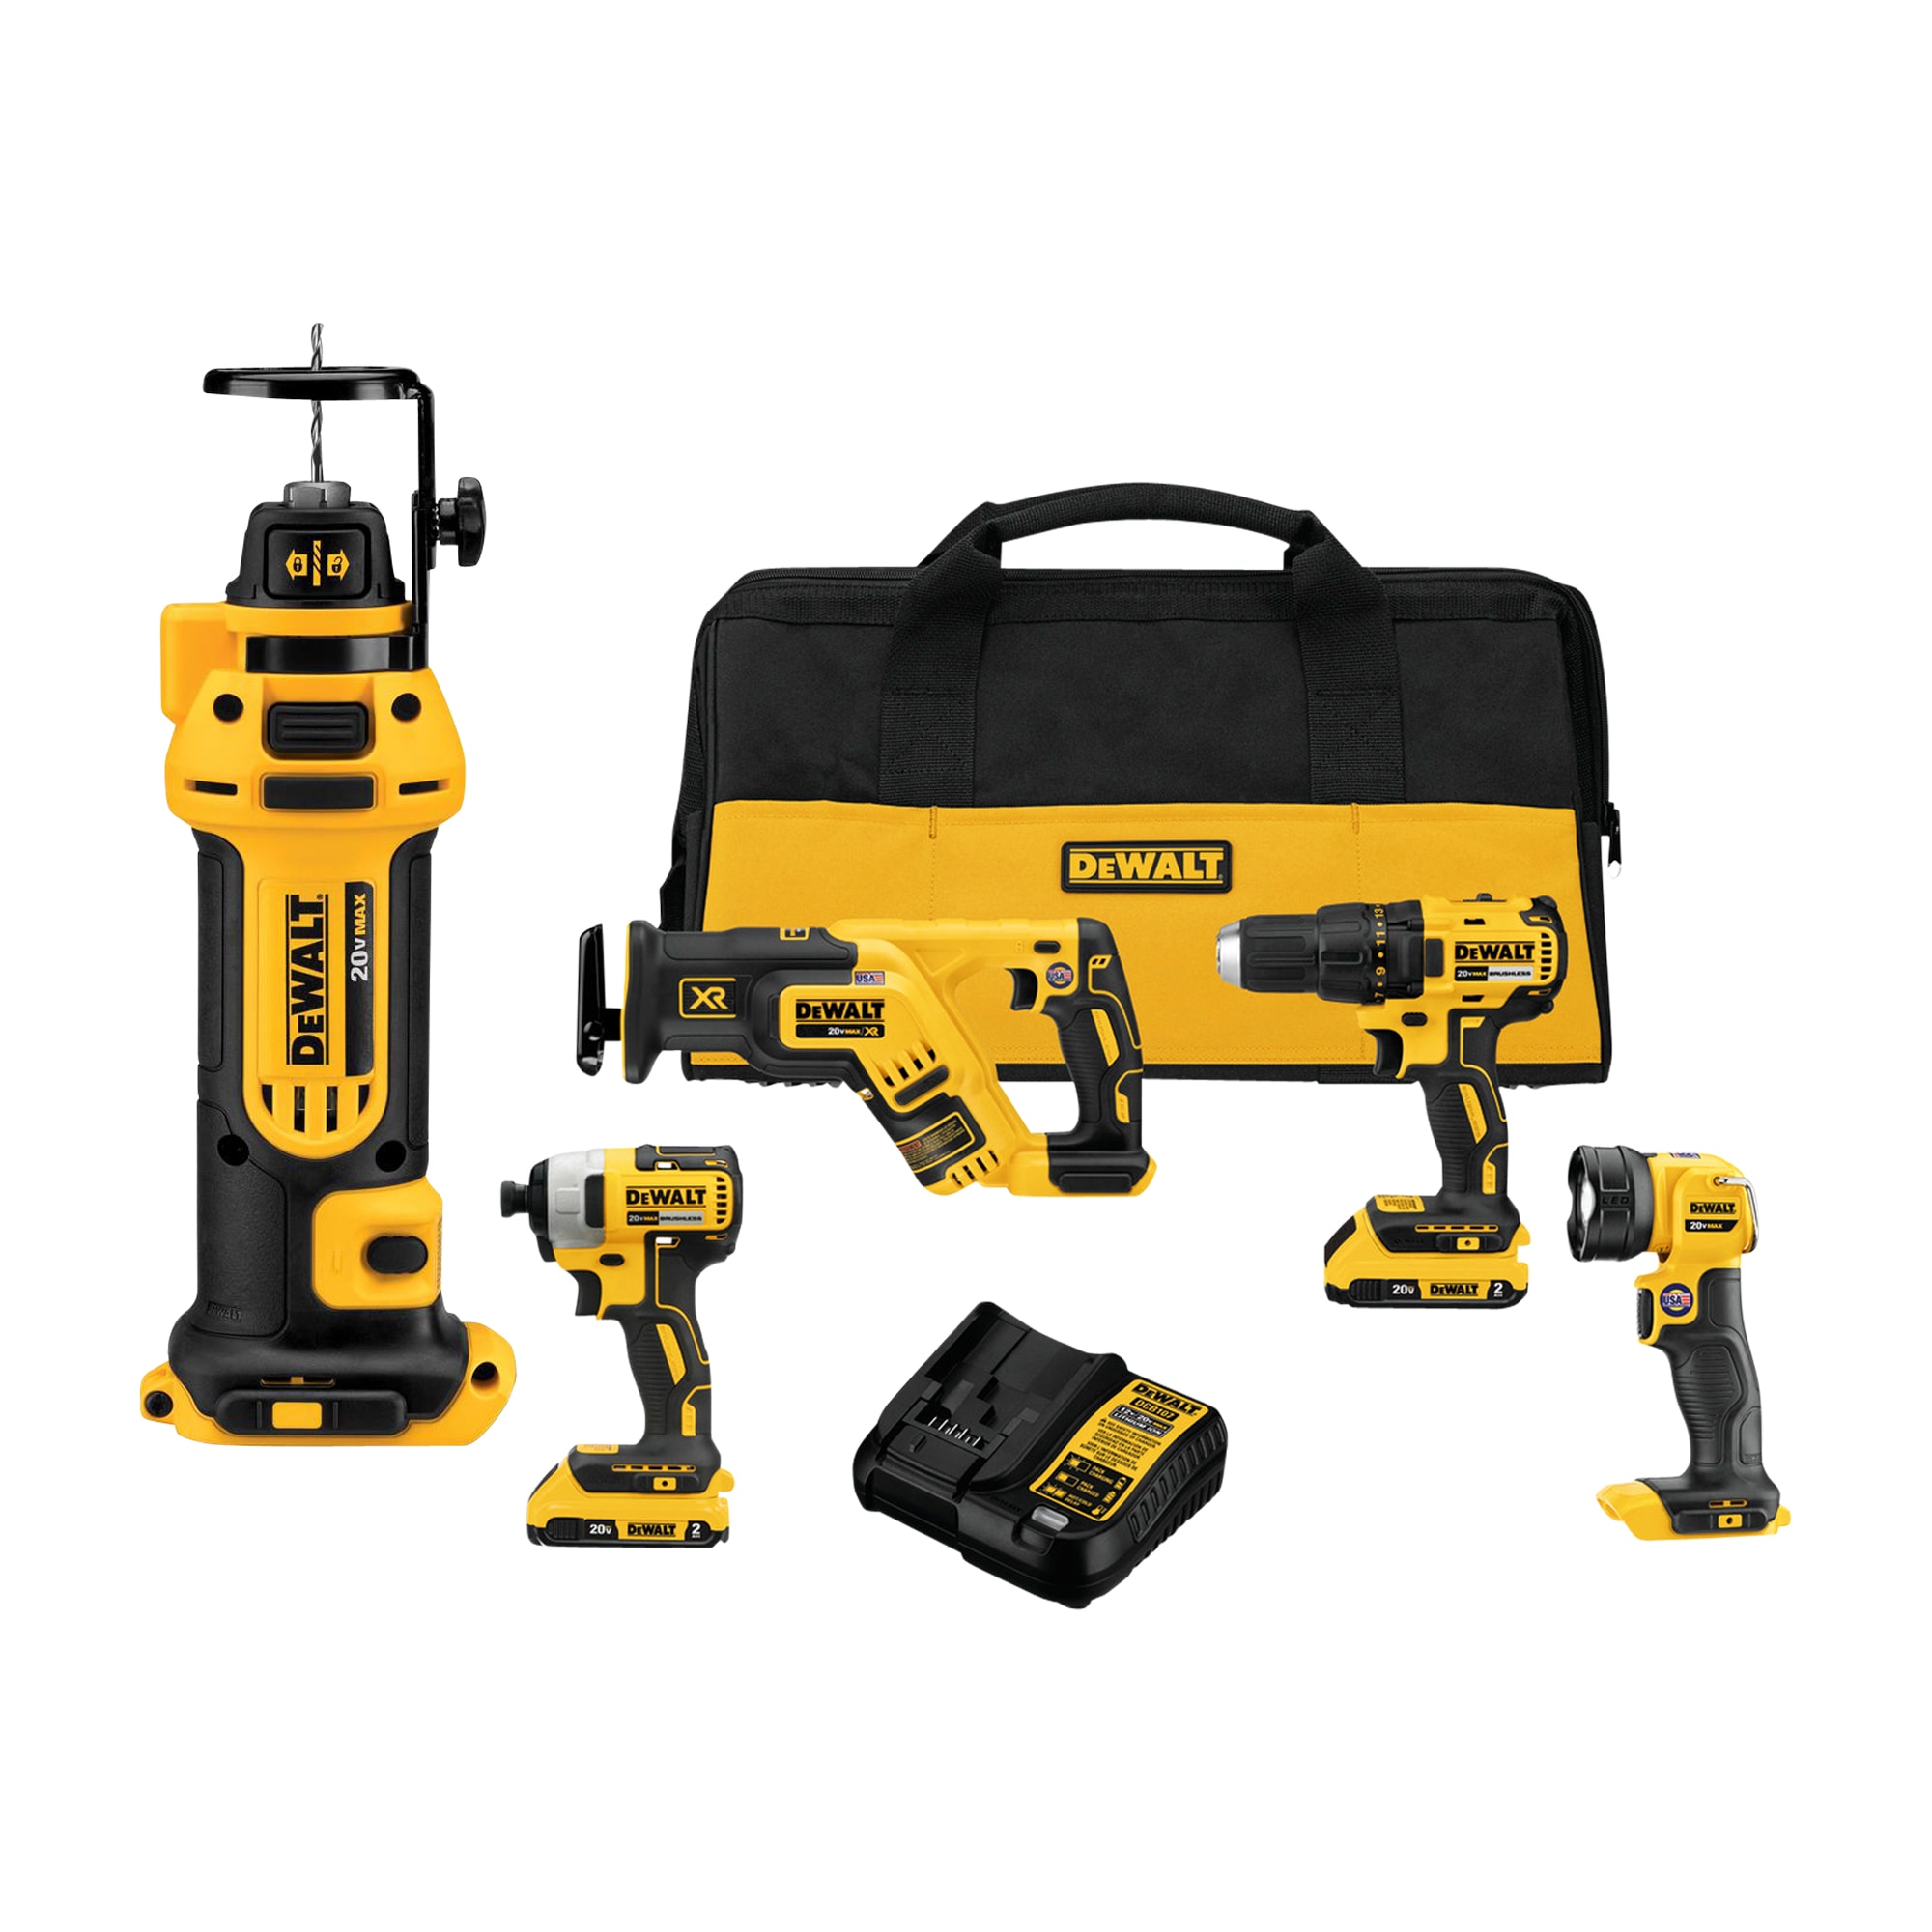 DEWALT 1-Speed Cordless 20-Volt Max Cutting Rotary Tool & 4-Tool 20-Volt Max Brushless Power Tool Combo Kit with Soft Case 2-Batteries and charger